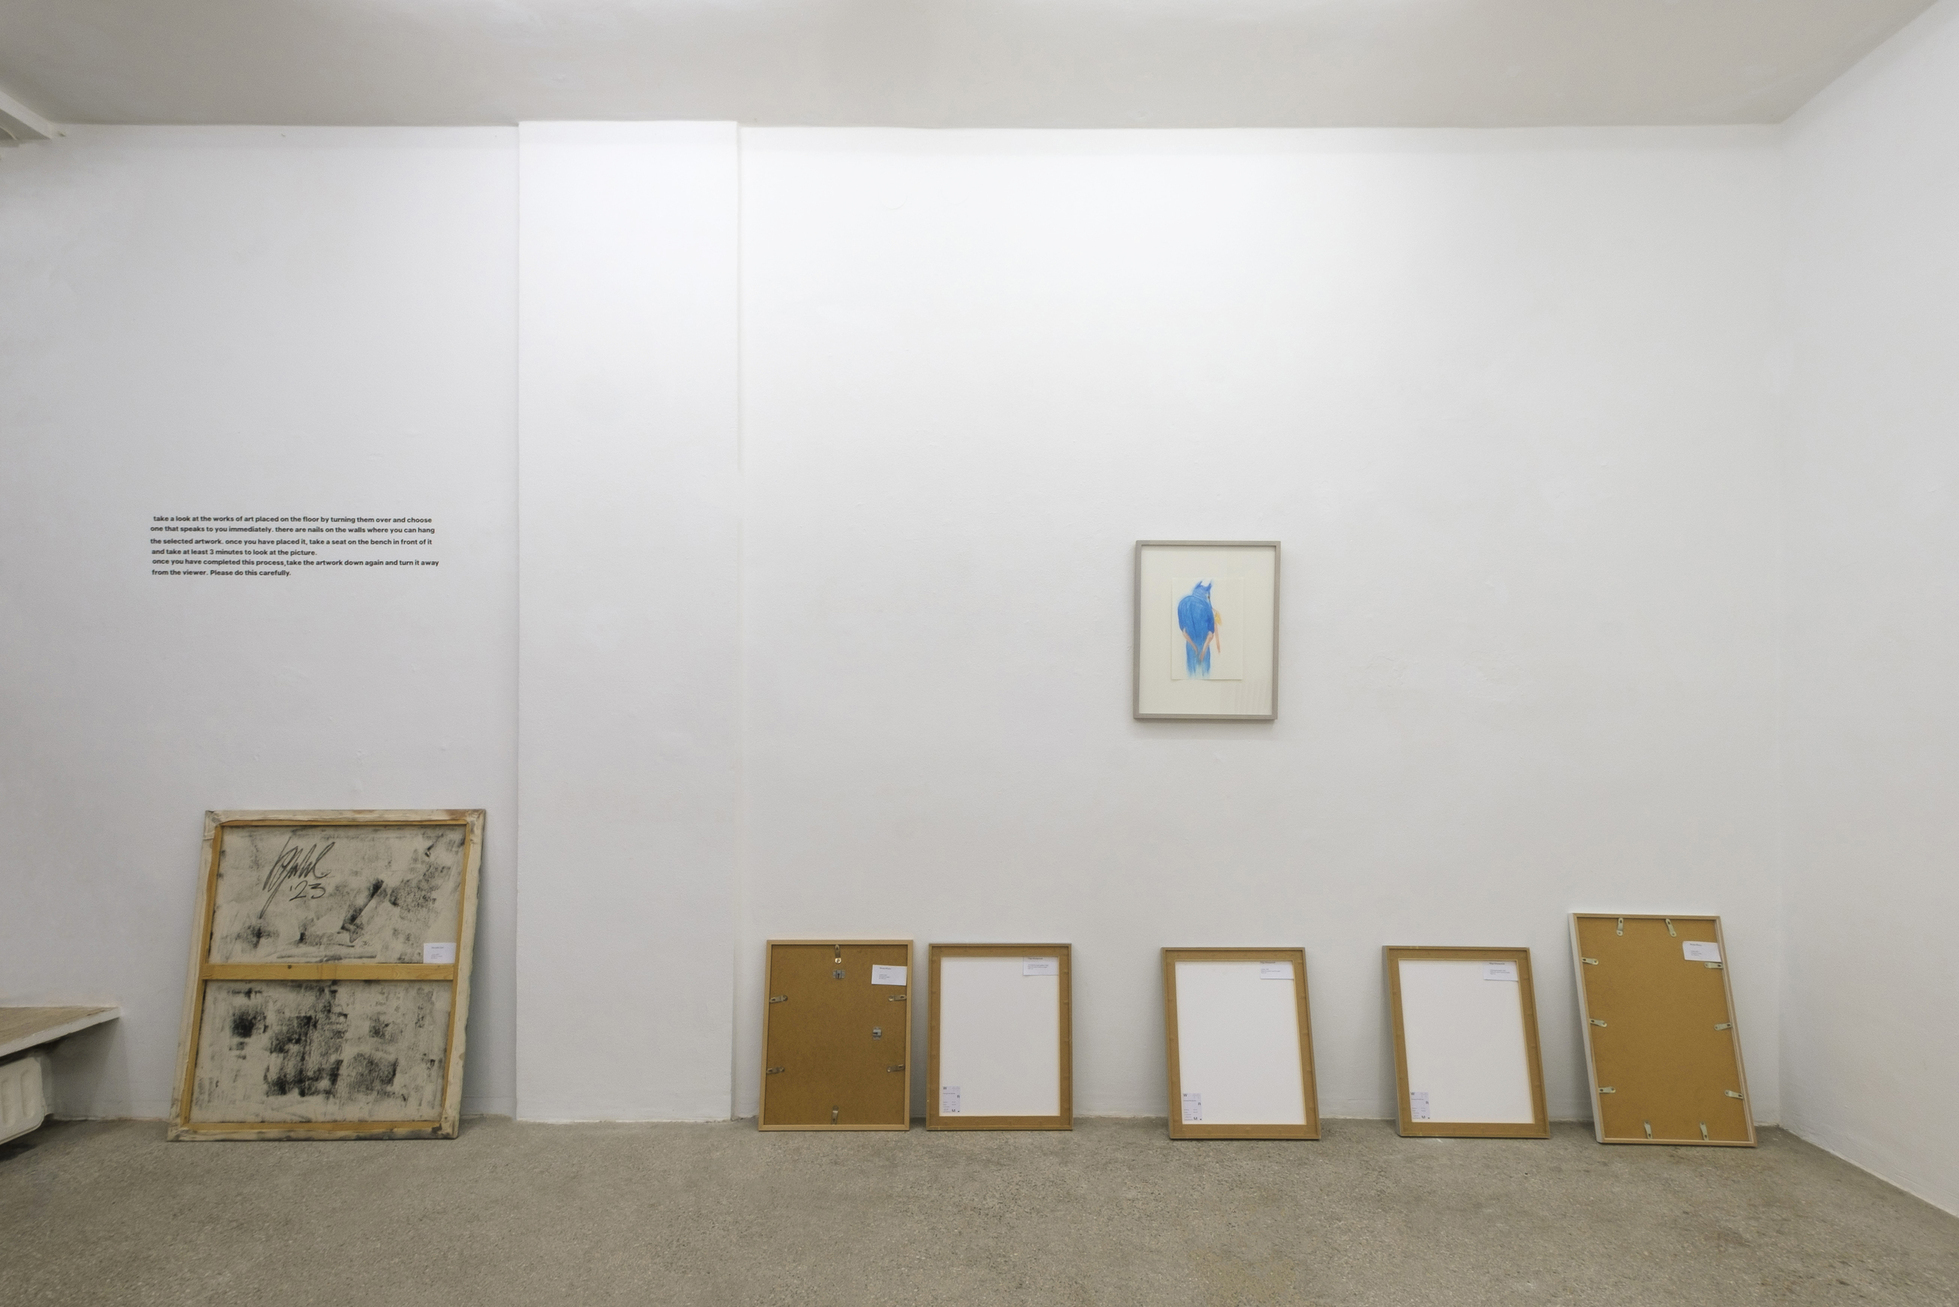 Installation view, "Self Service", with work by Olga WiedenhÃ¶ft, Untitled, 2022, Watercolor pencil / pencil on paper, 30x21 cm